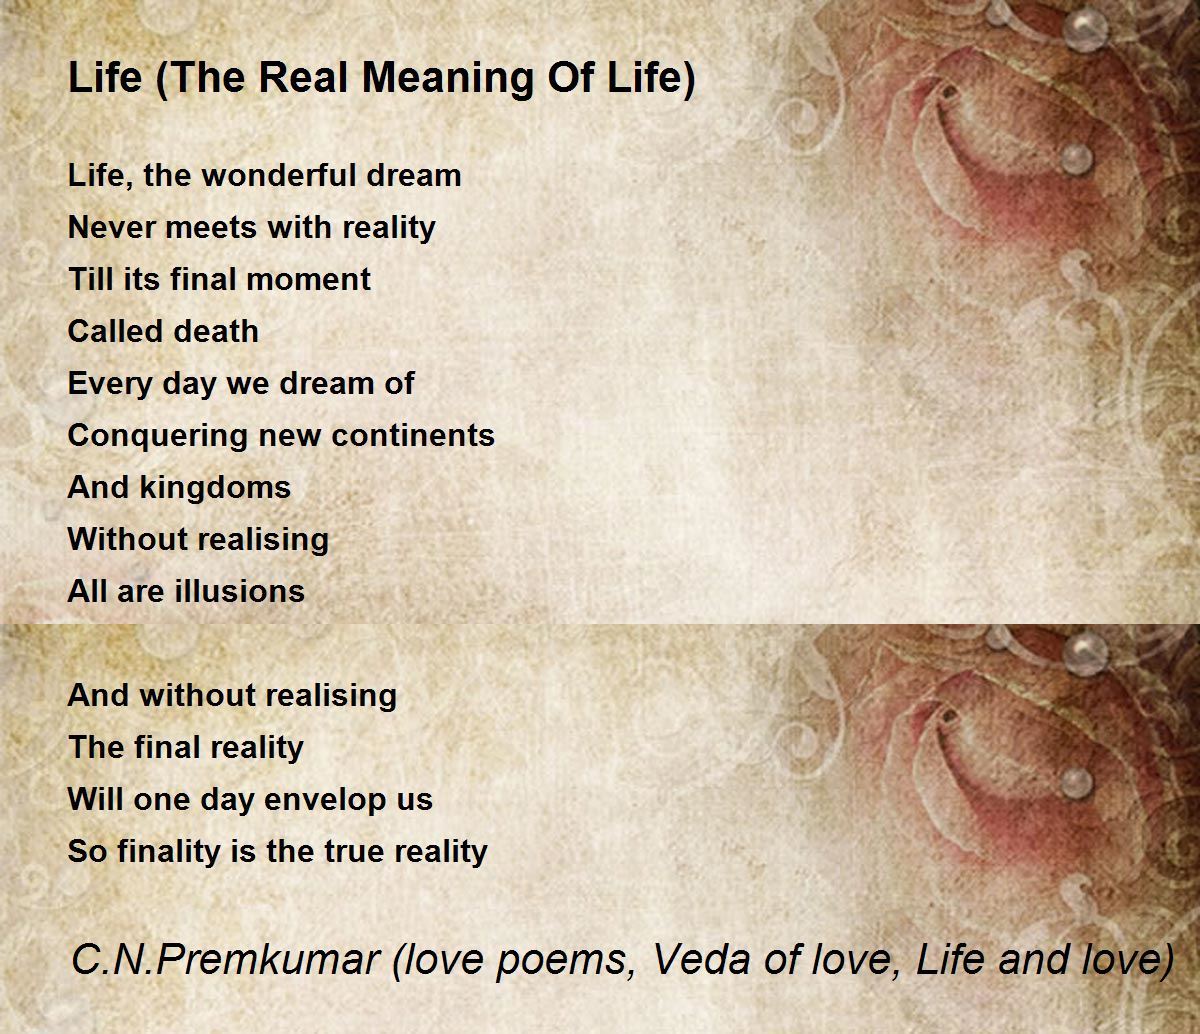 life-the-real-meaning-of-life.jpg